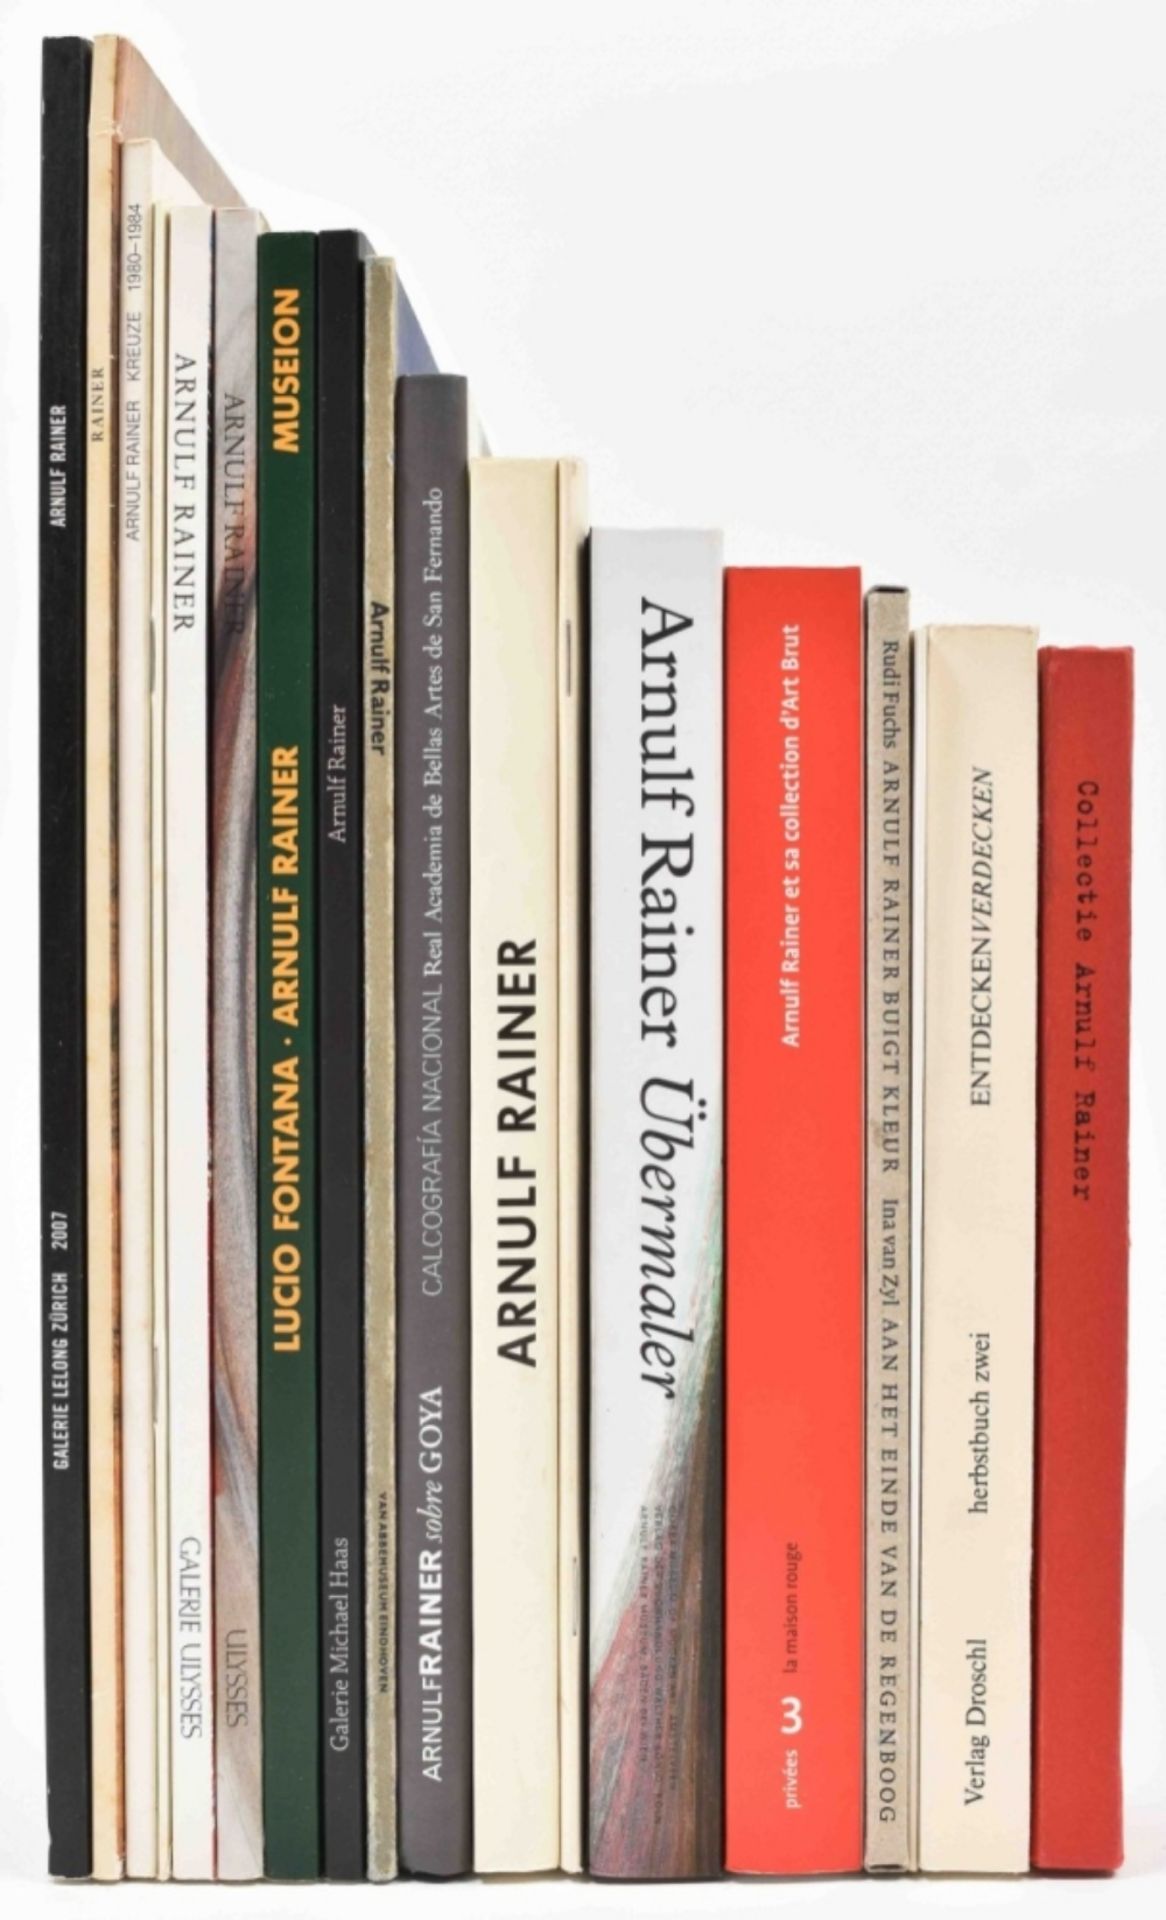 18 publications and catalogues of Arnulf Reiner: Arnulf Reiner